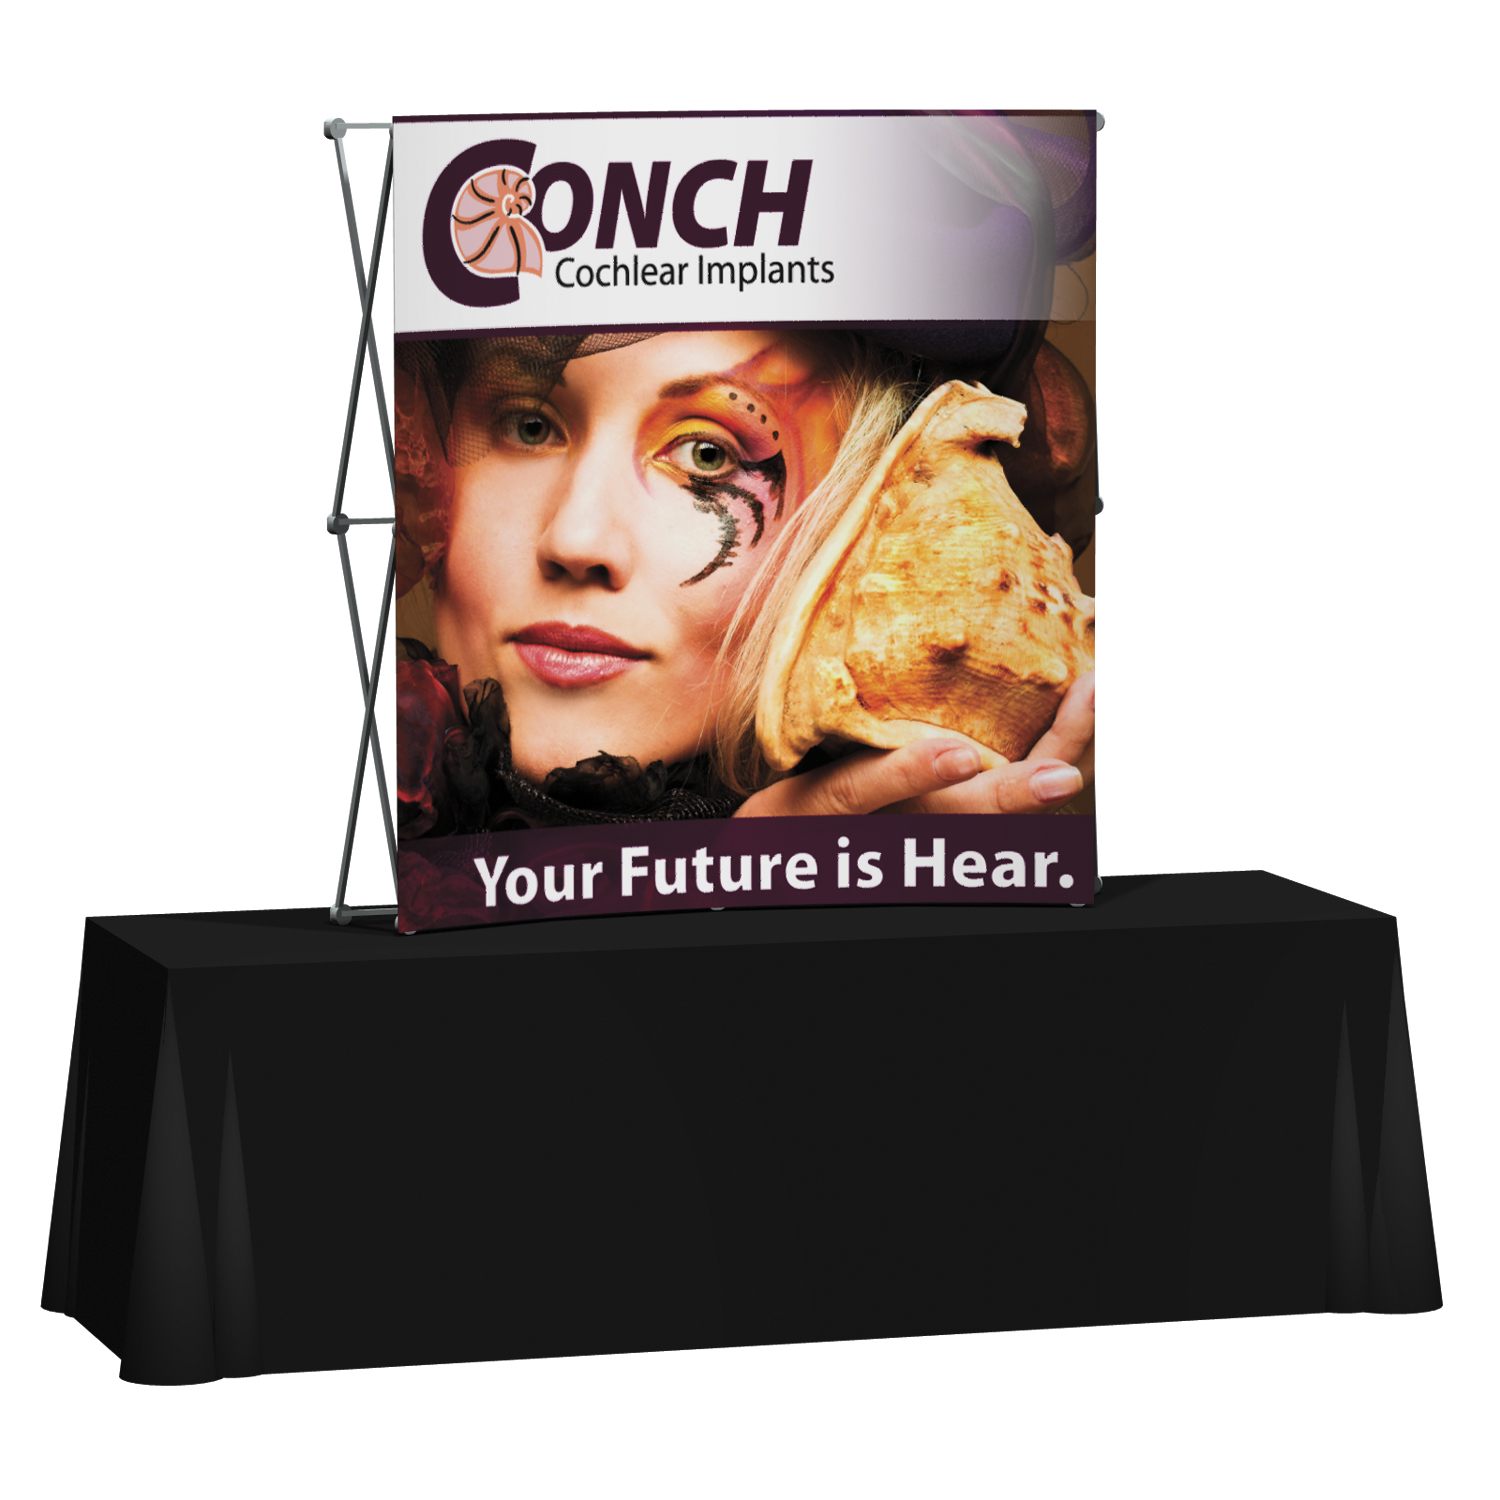 Splash 6' Curve Tabletop with Face Graphic Kit